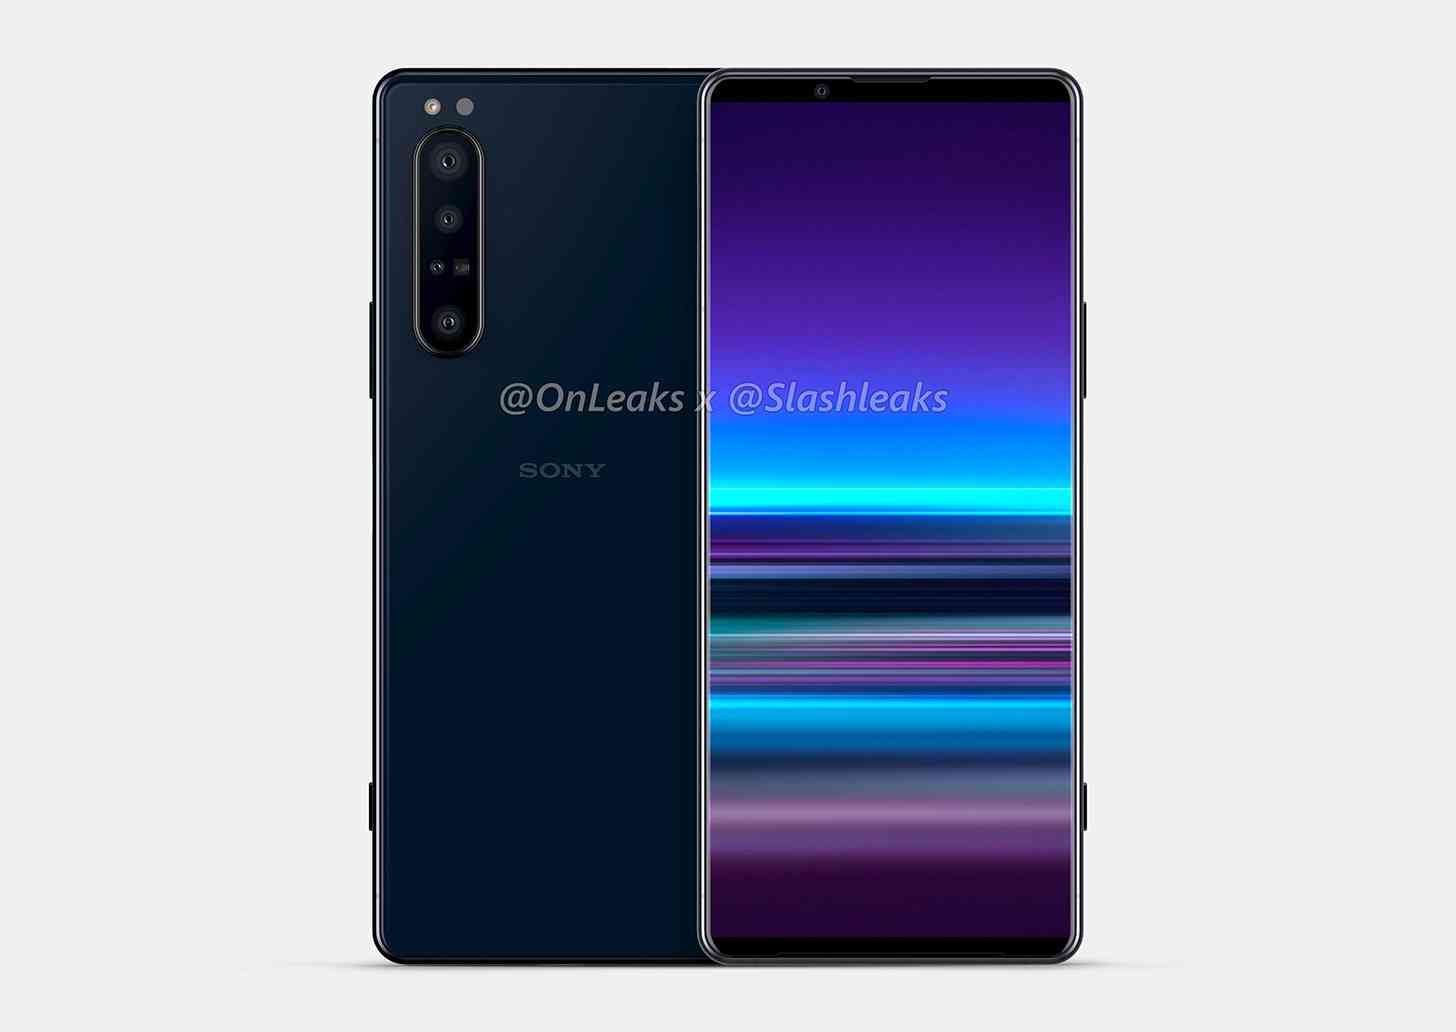 Xperia 5 Plus renders front